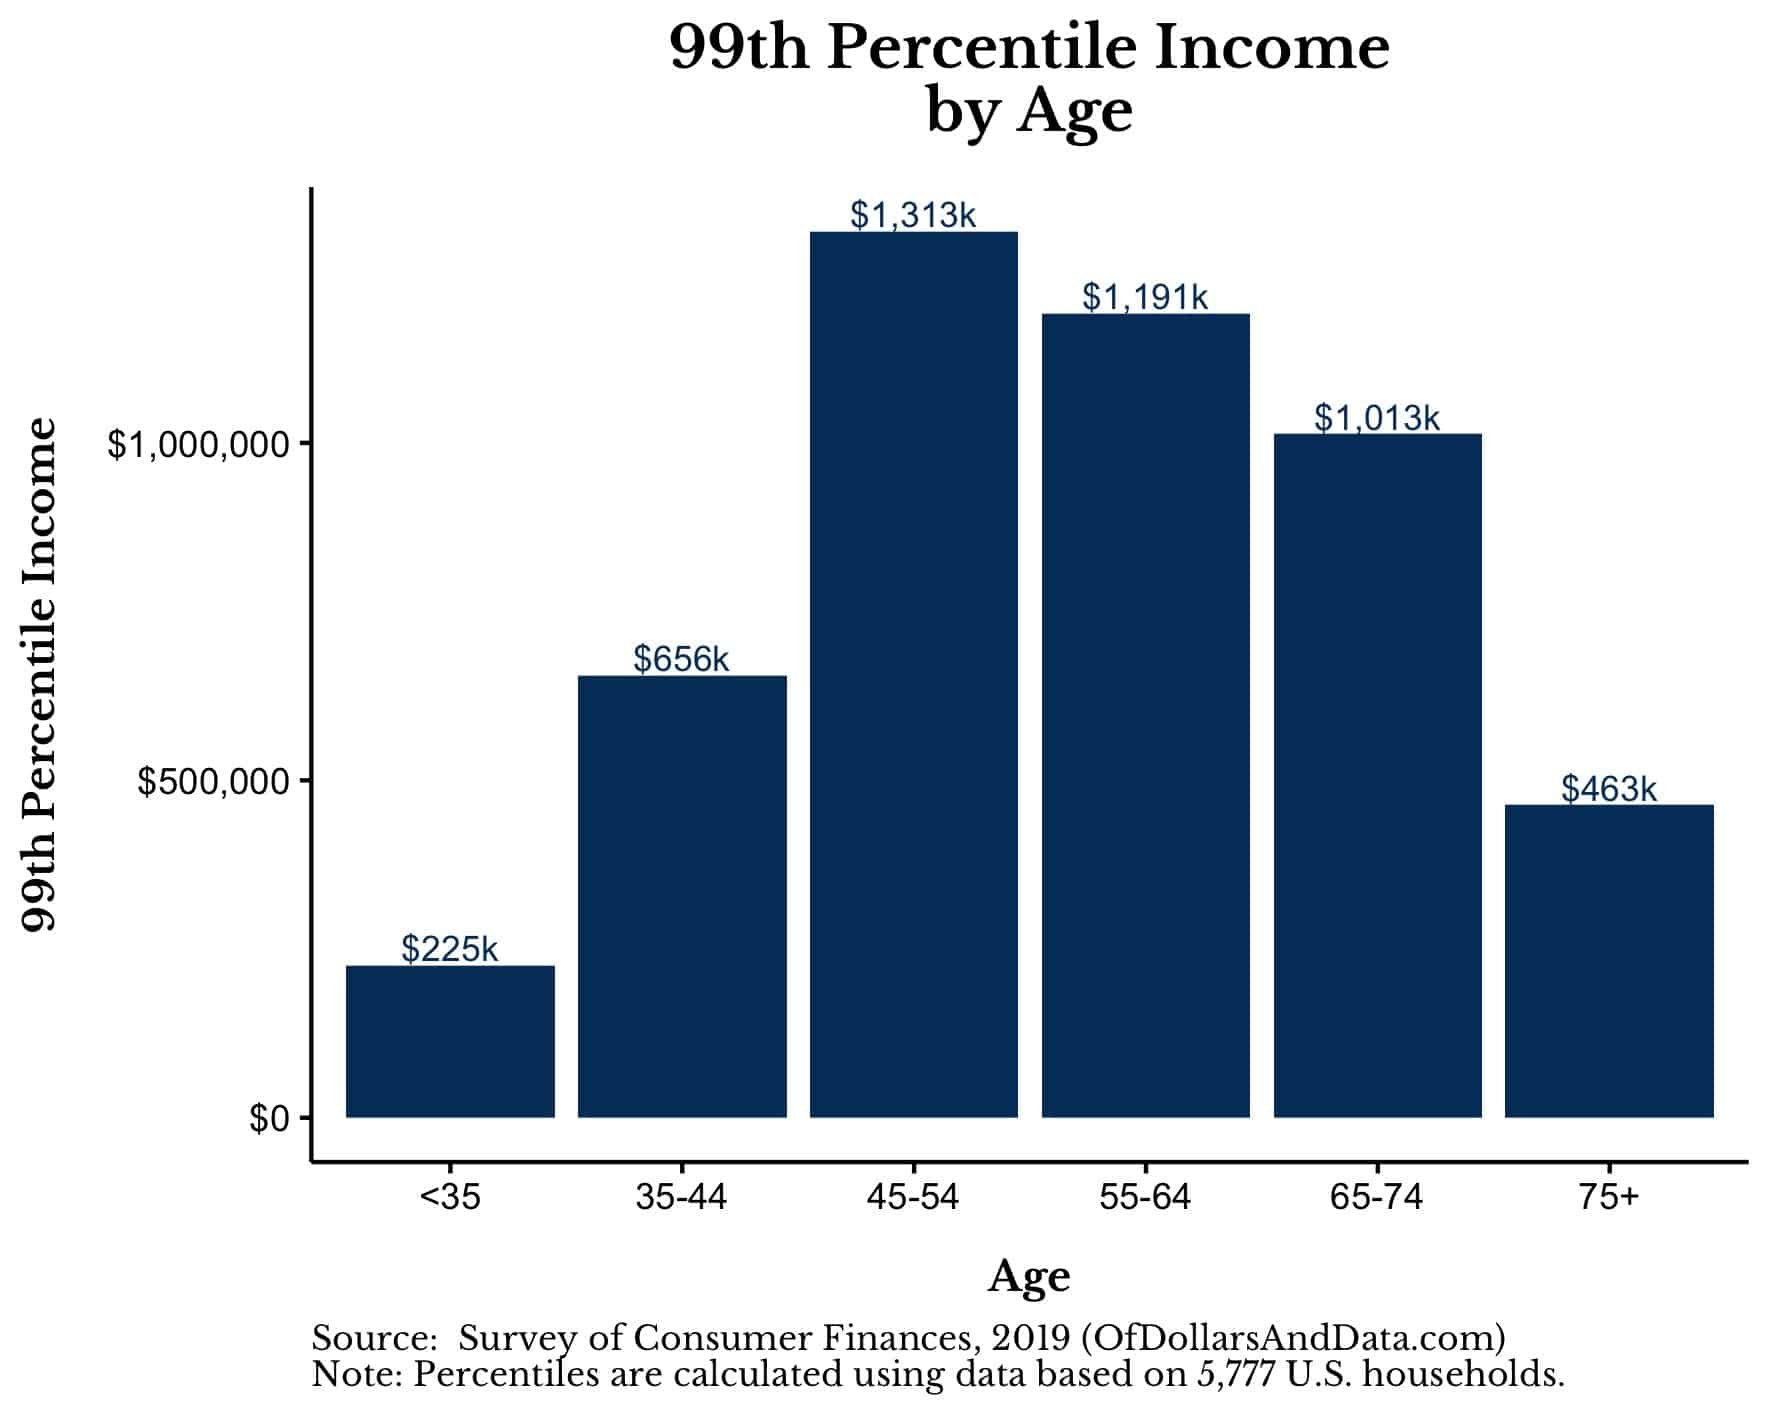 99th percentile household income by age.